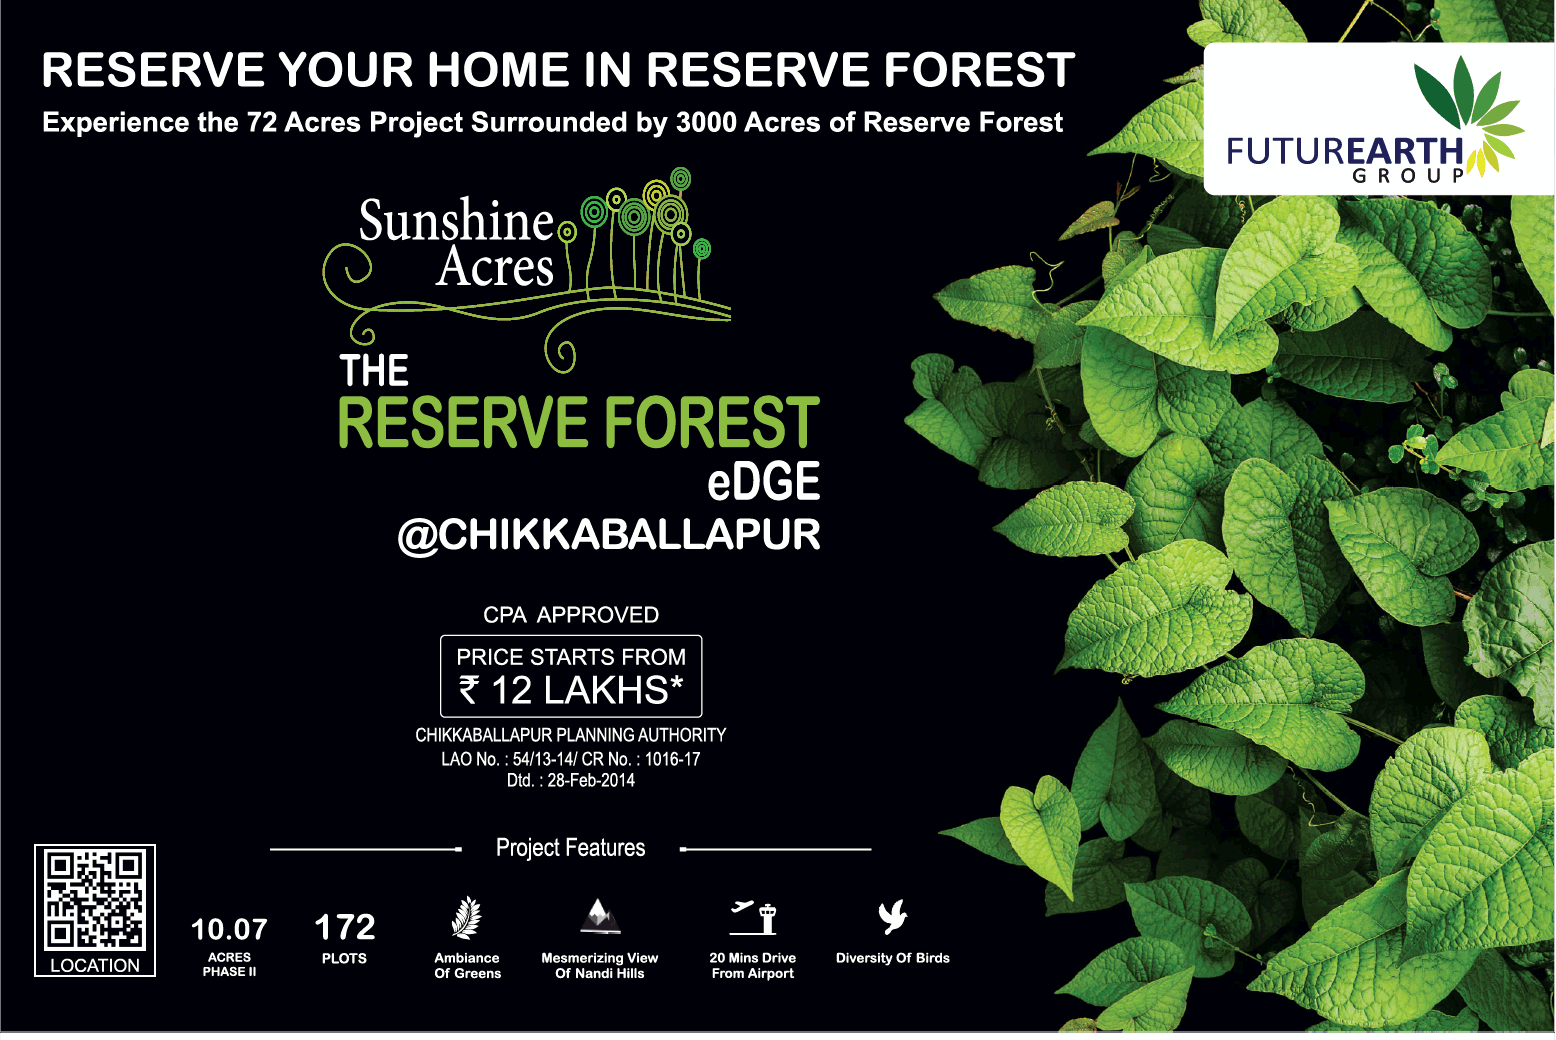 Experience the 72 acres project surrounded by 3000 acres of reserve forest at Sunshine Acres, Bangalore Update